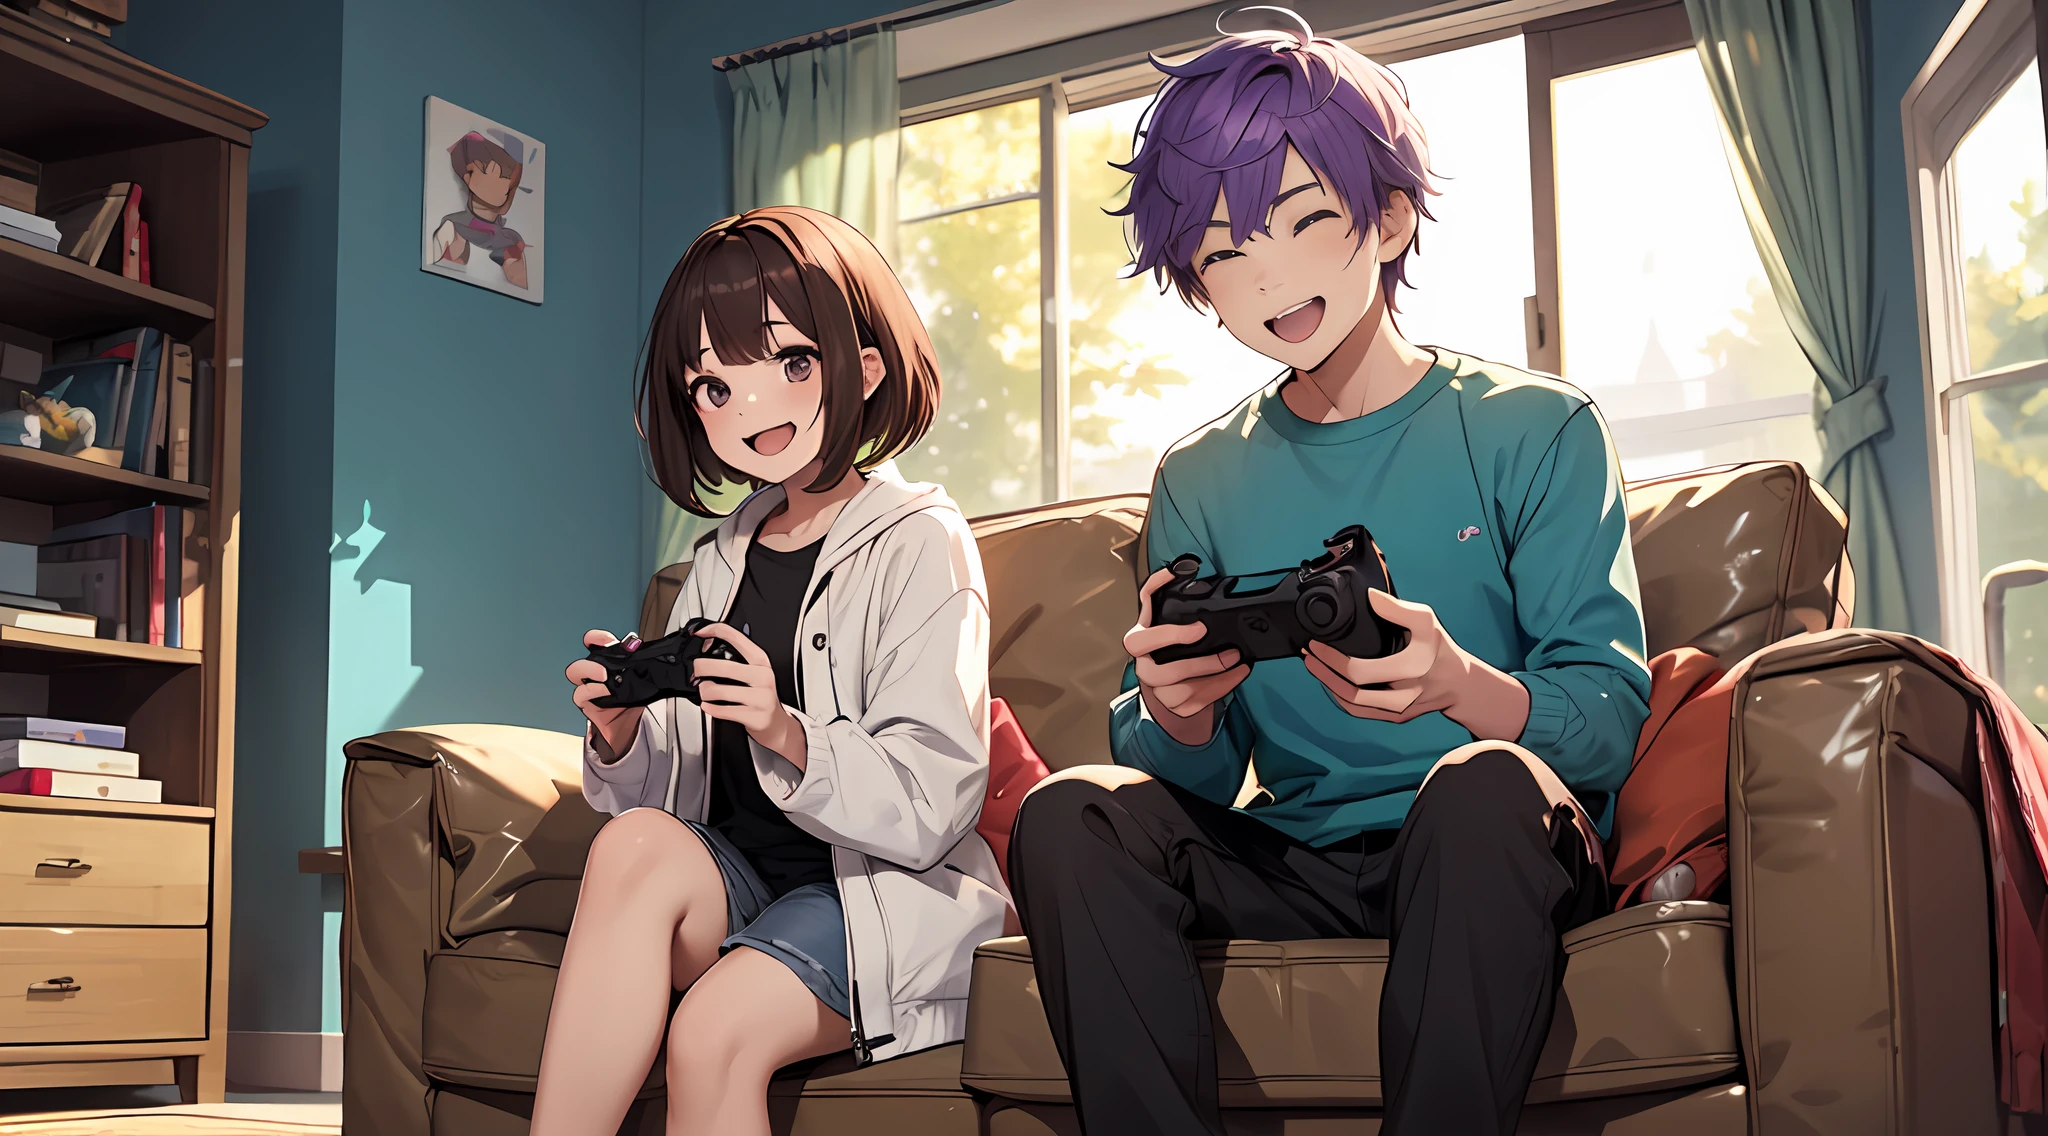 Boy with purple hair and girl with brown hair、great laughter、Video games together、sofas、DVR、relax vibe、high-level image quality、A delightful、controller、Playing、Deformed